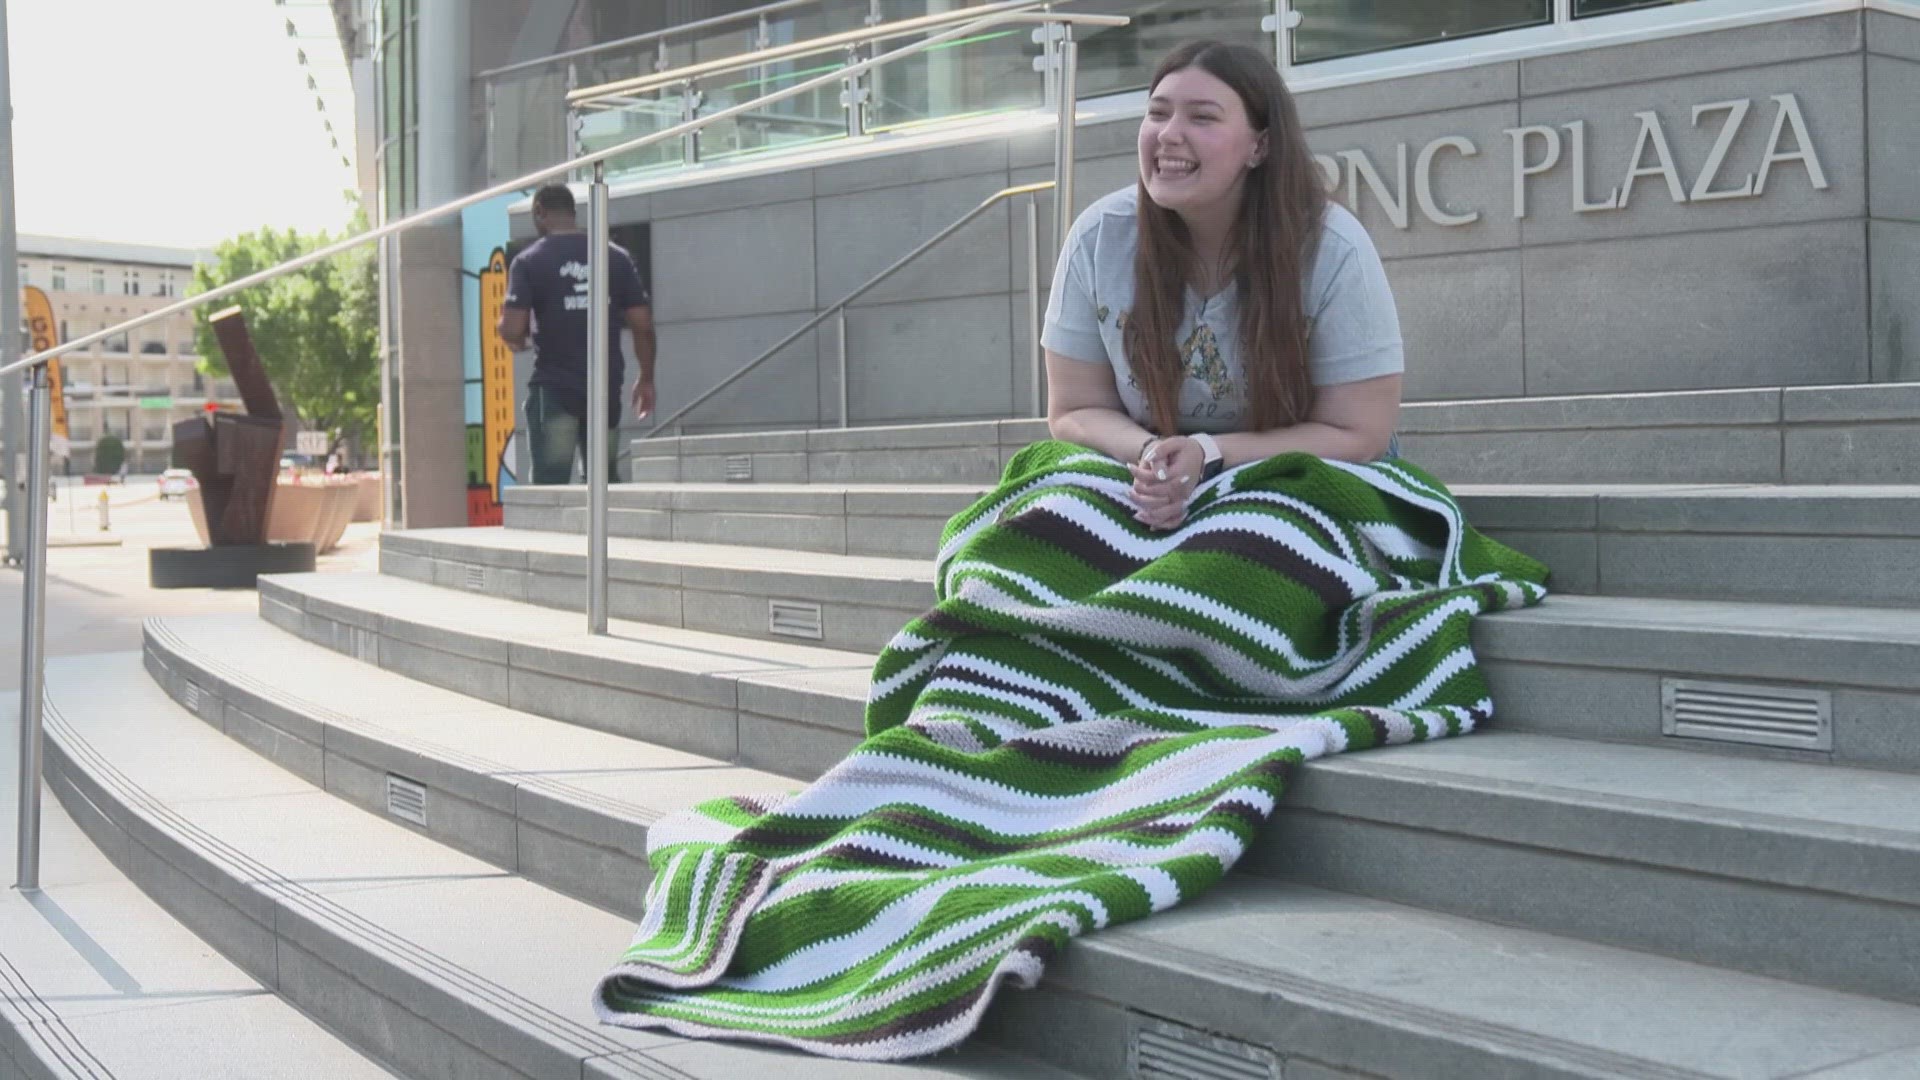 Since October, Zoe Hill has been crocheting a blanket to represent the wins and losses recorded by the Stars all season. The $100 of yarn became beloved by fans.